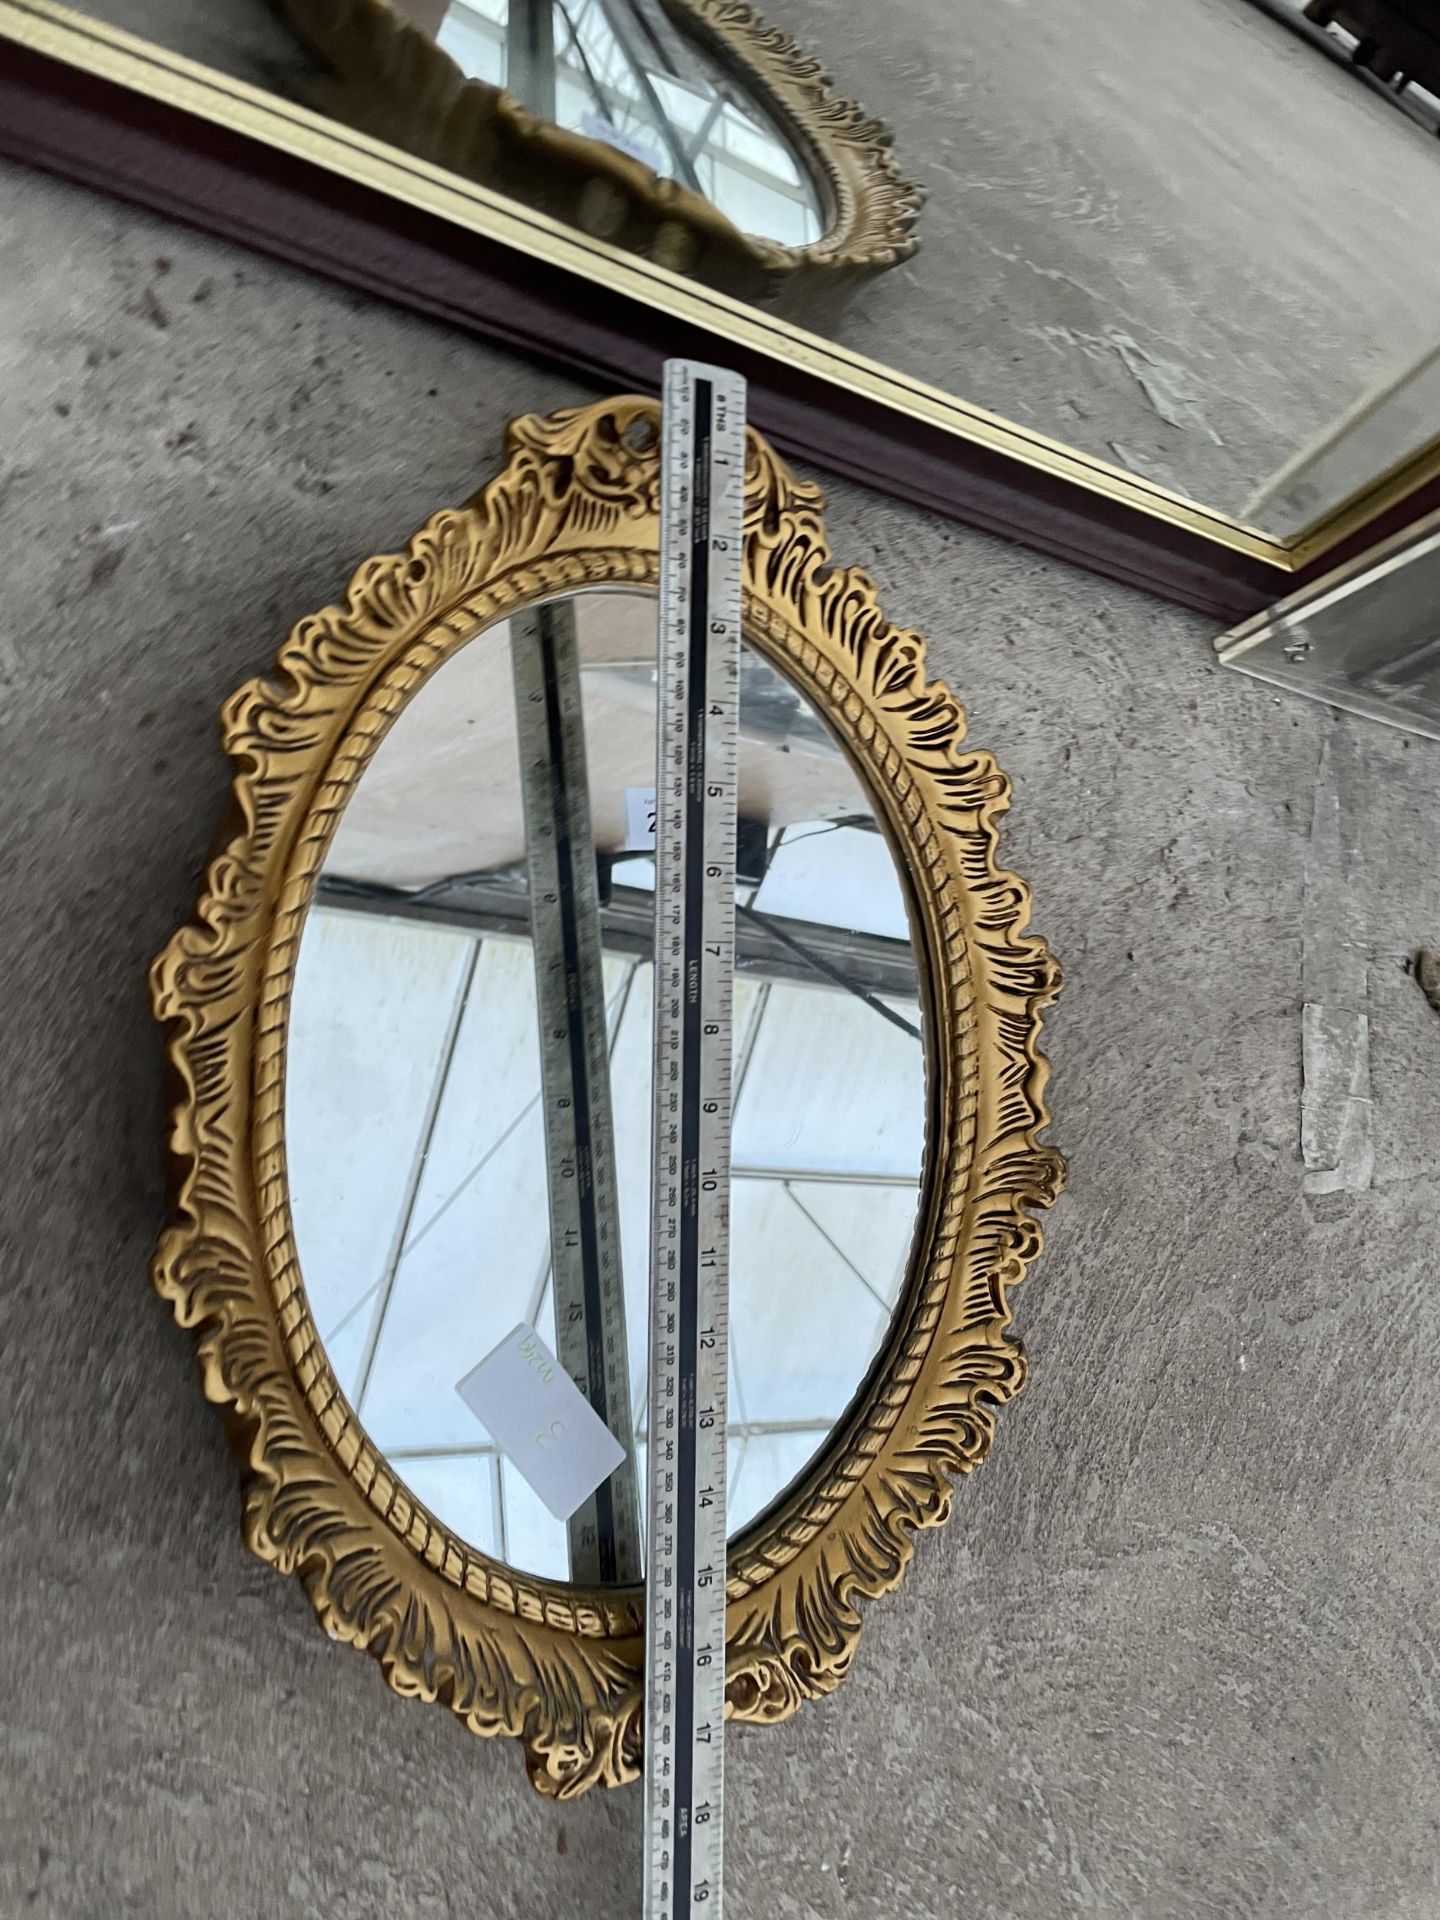 AN OVAL GILT FRAMED WALL MIRROR AND WOODEN FRAMED MIRROR - Image 7 of 7